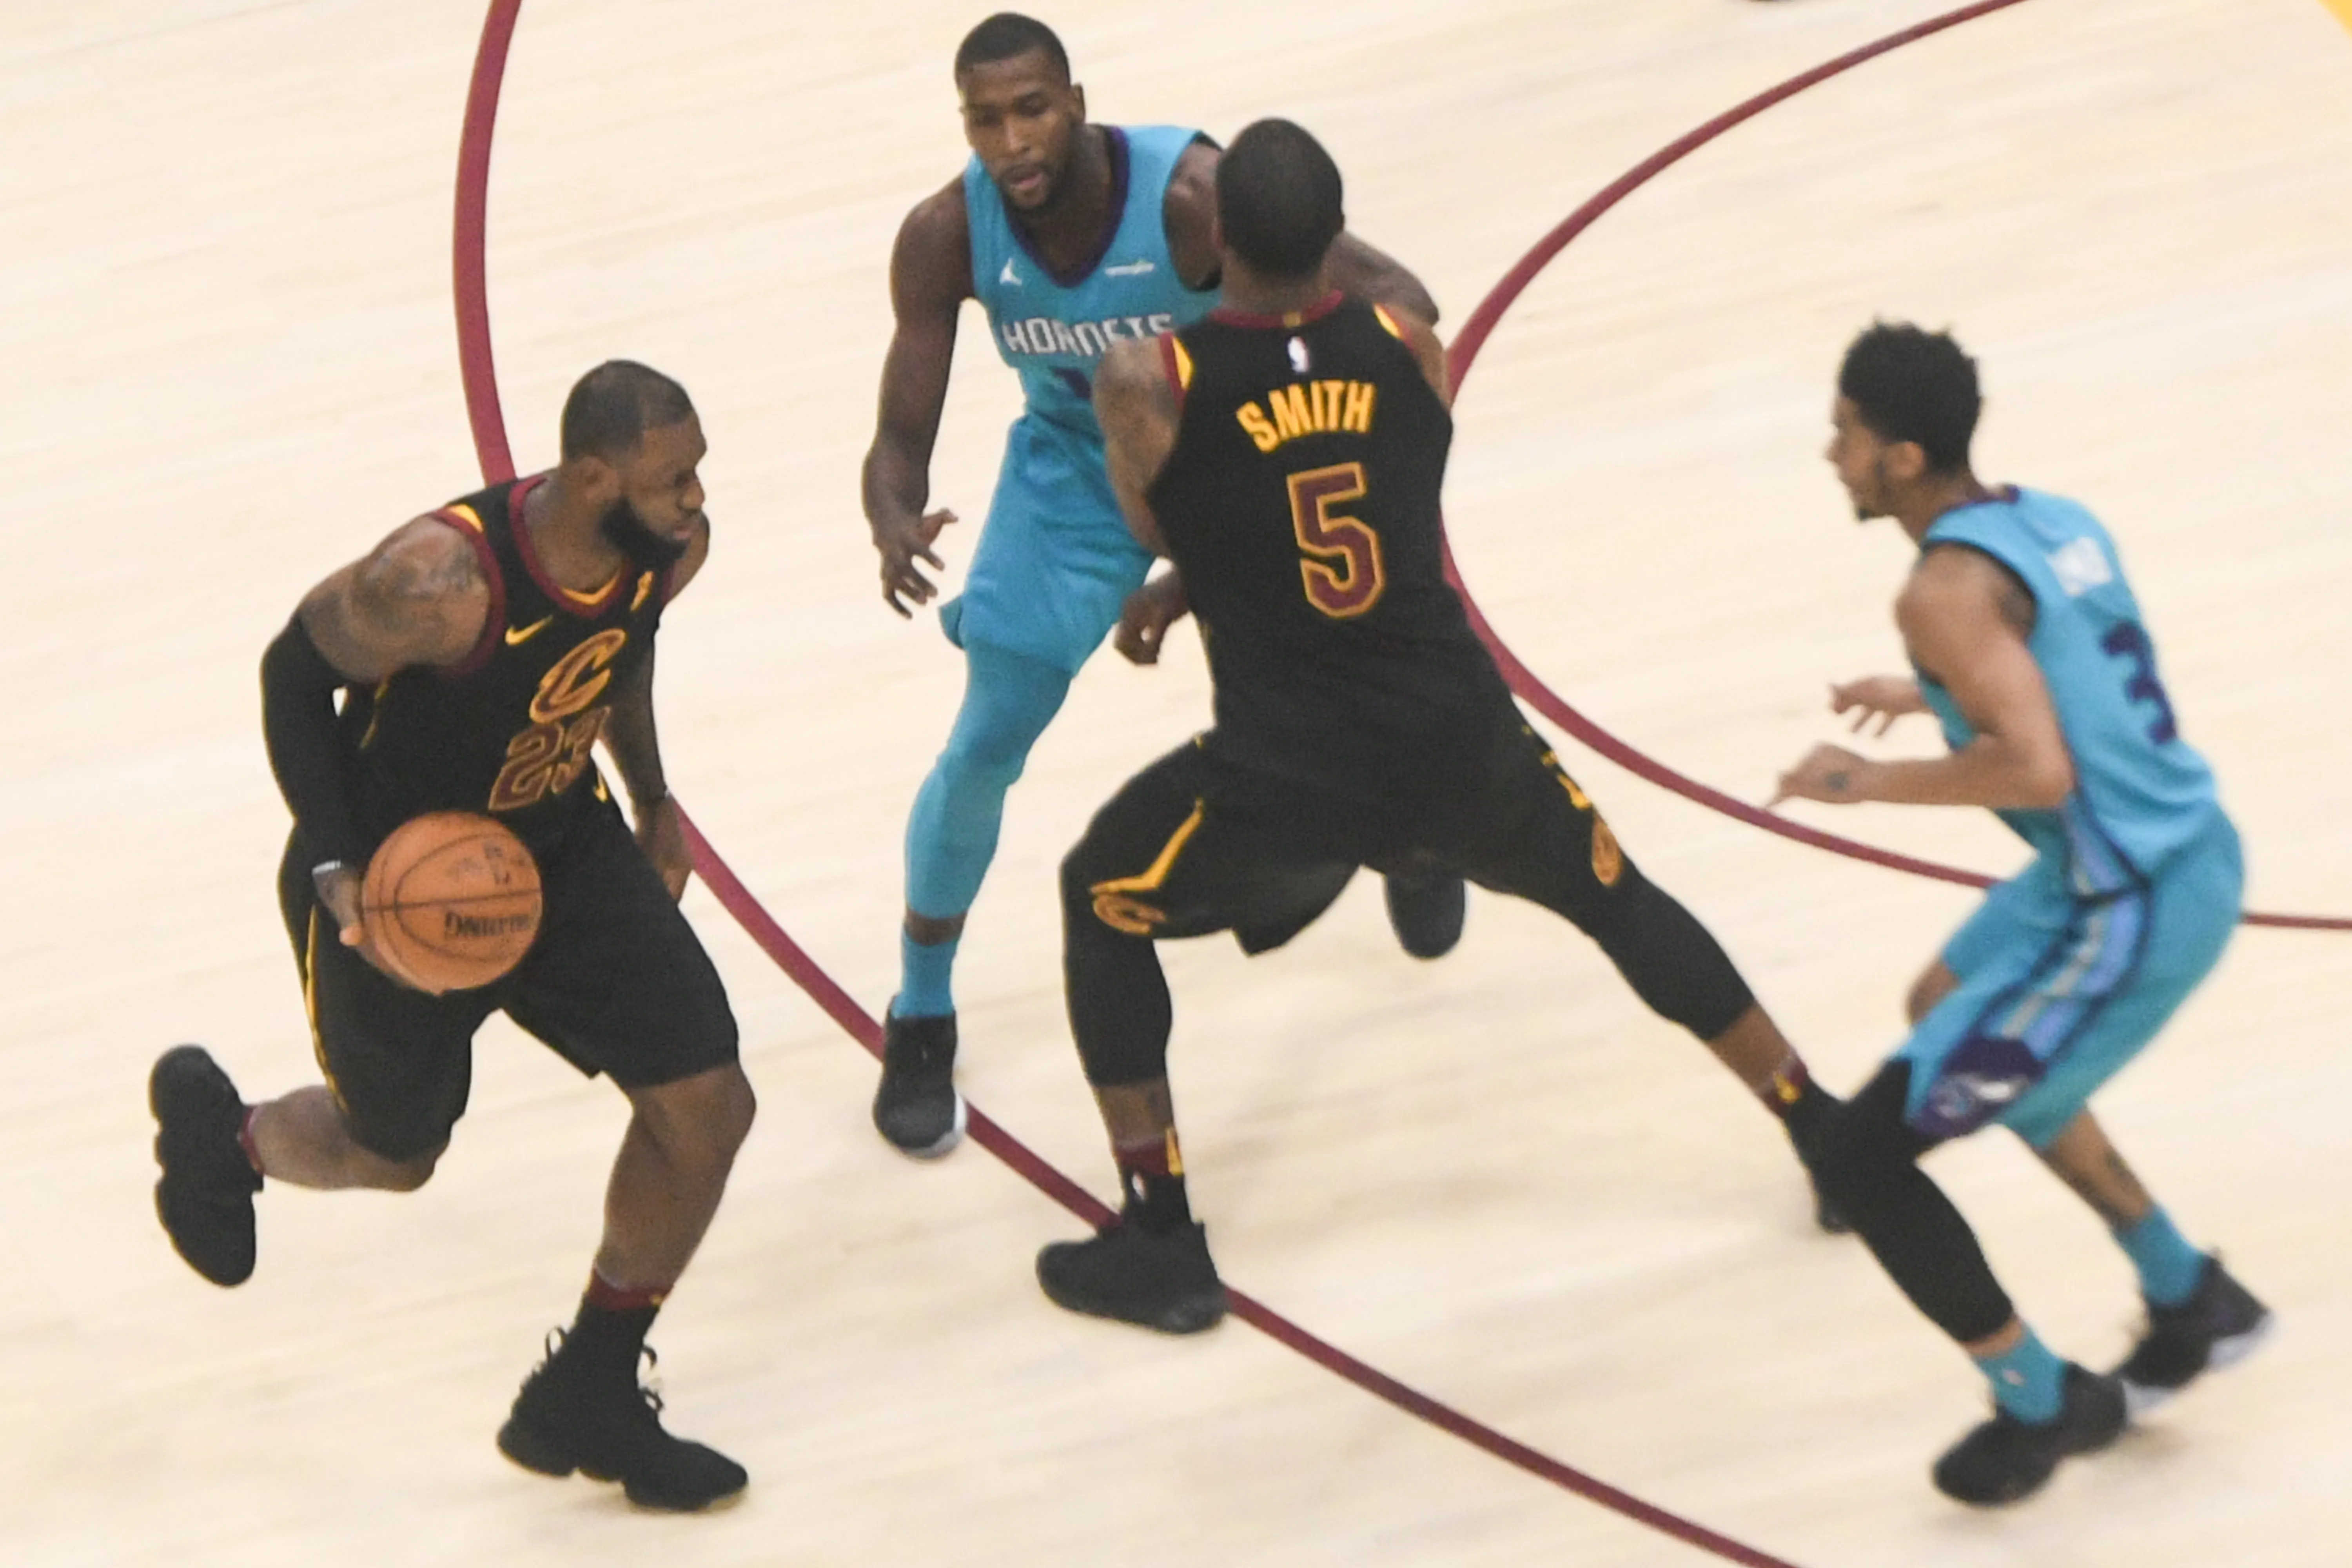 A photograph shows LeBron James dribbling a basketball during a basketball game